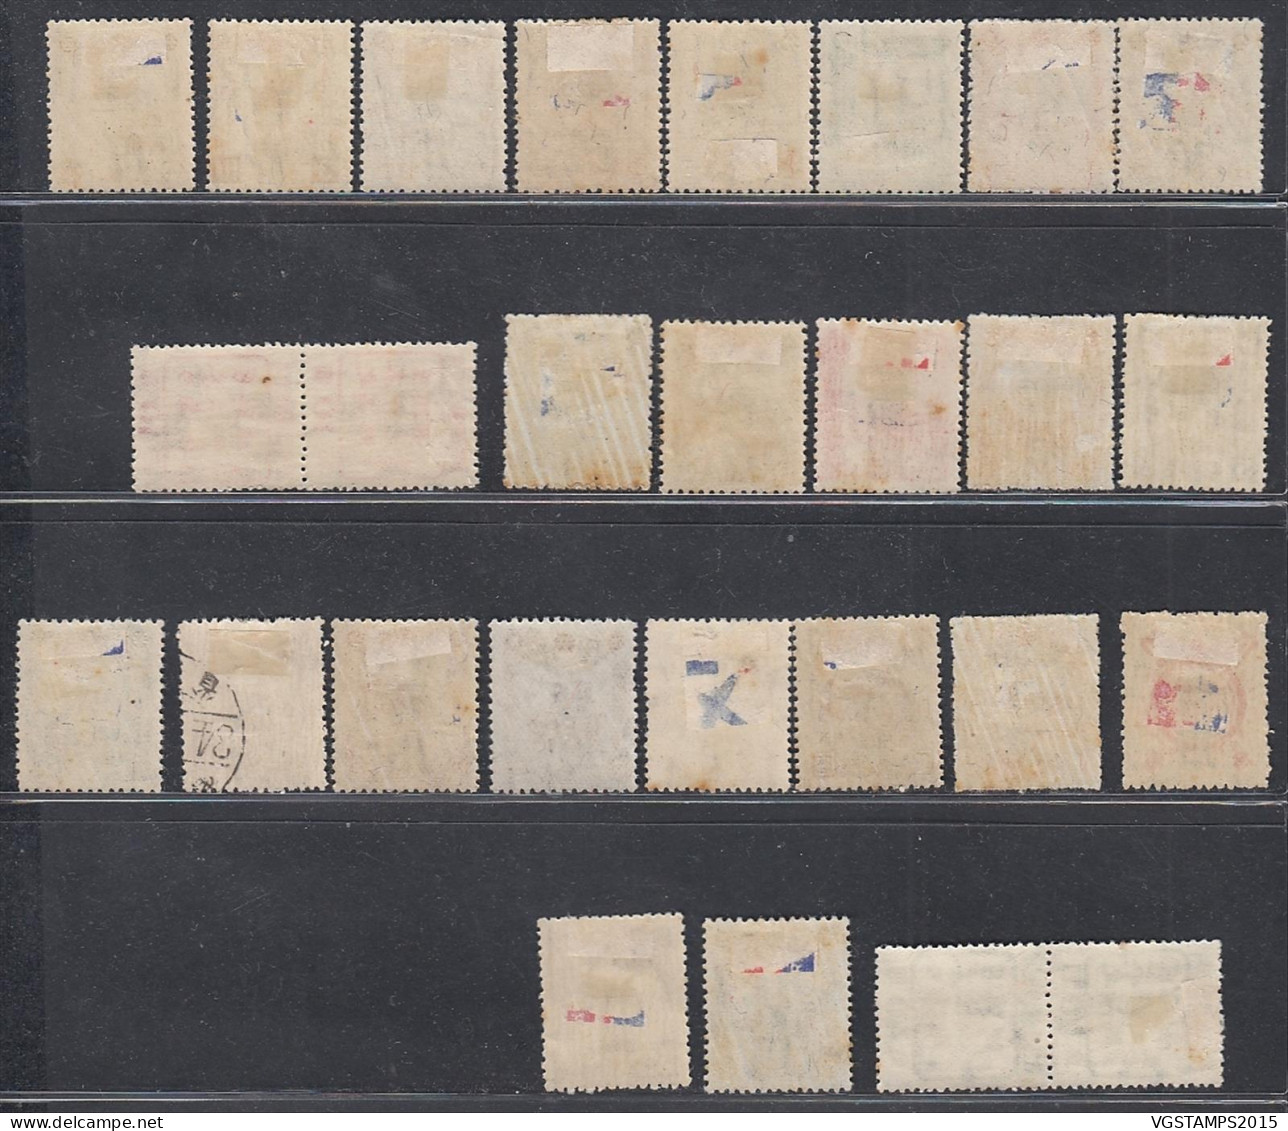 Chine 1945 - Surcharges Locales - Nord Est Province-SHUN YANG- Timbres  Avec Charnière. Nr.: 1/27.... (VG) DC-11942 - Noordoost-China 1946-48